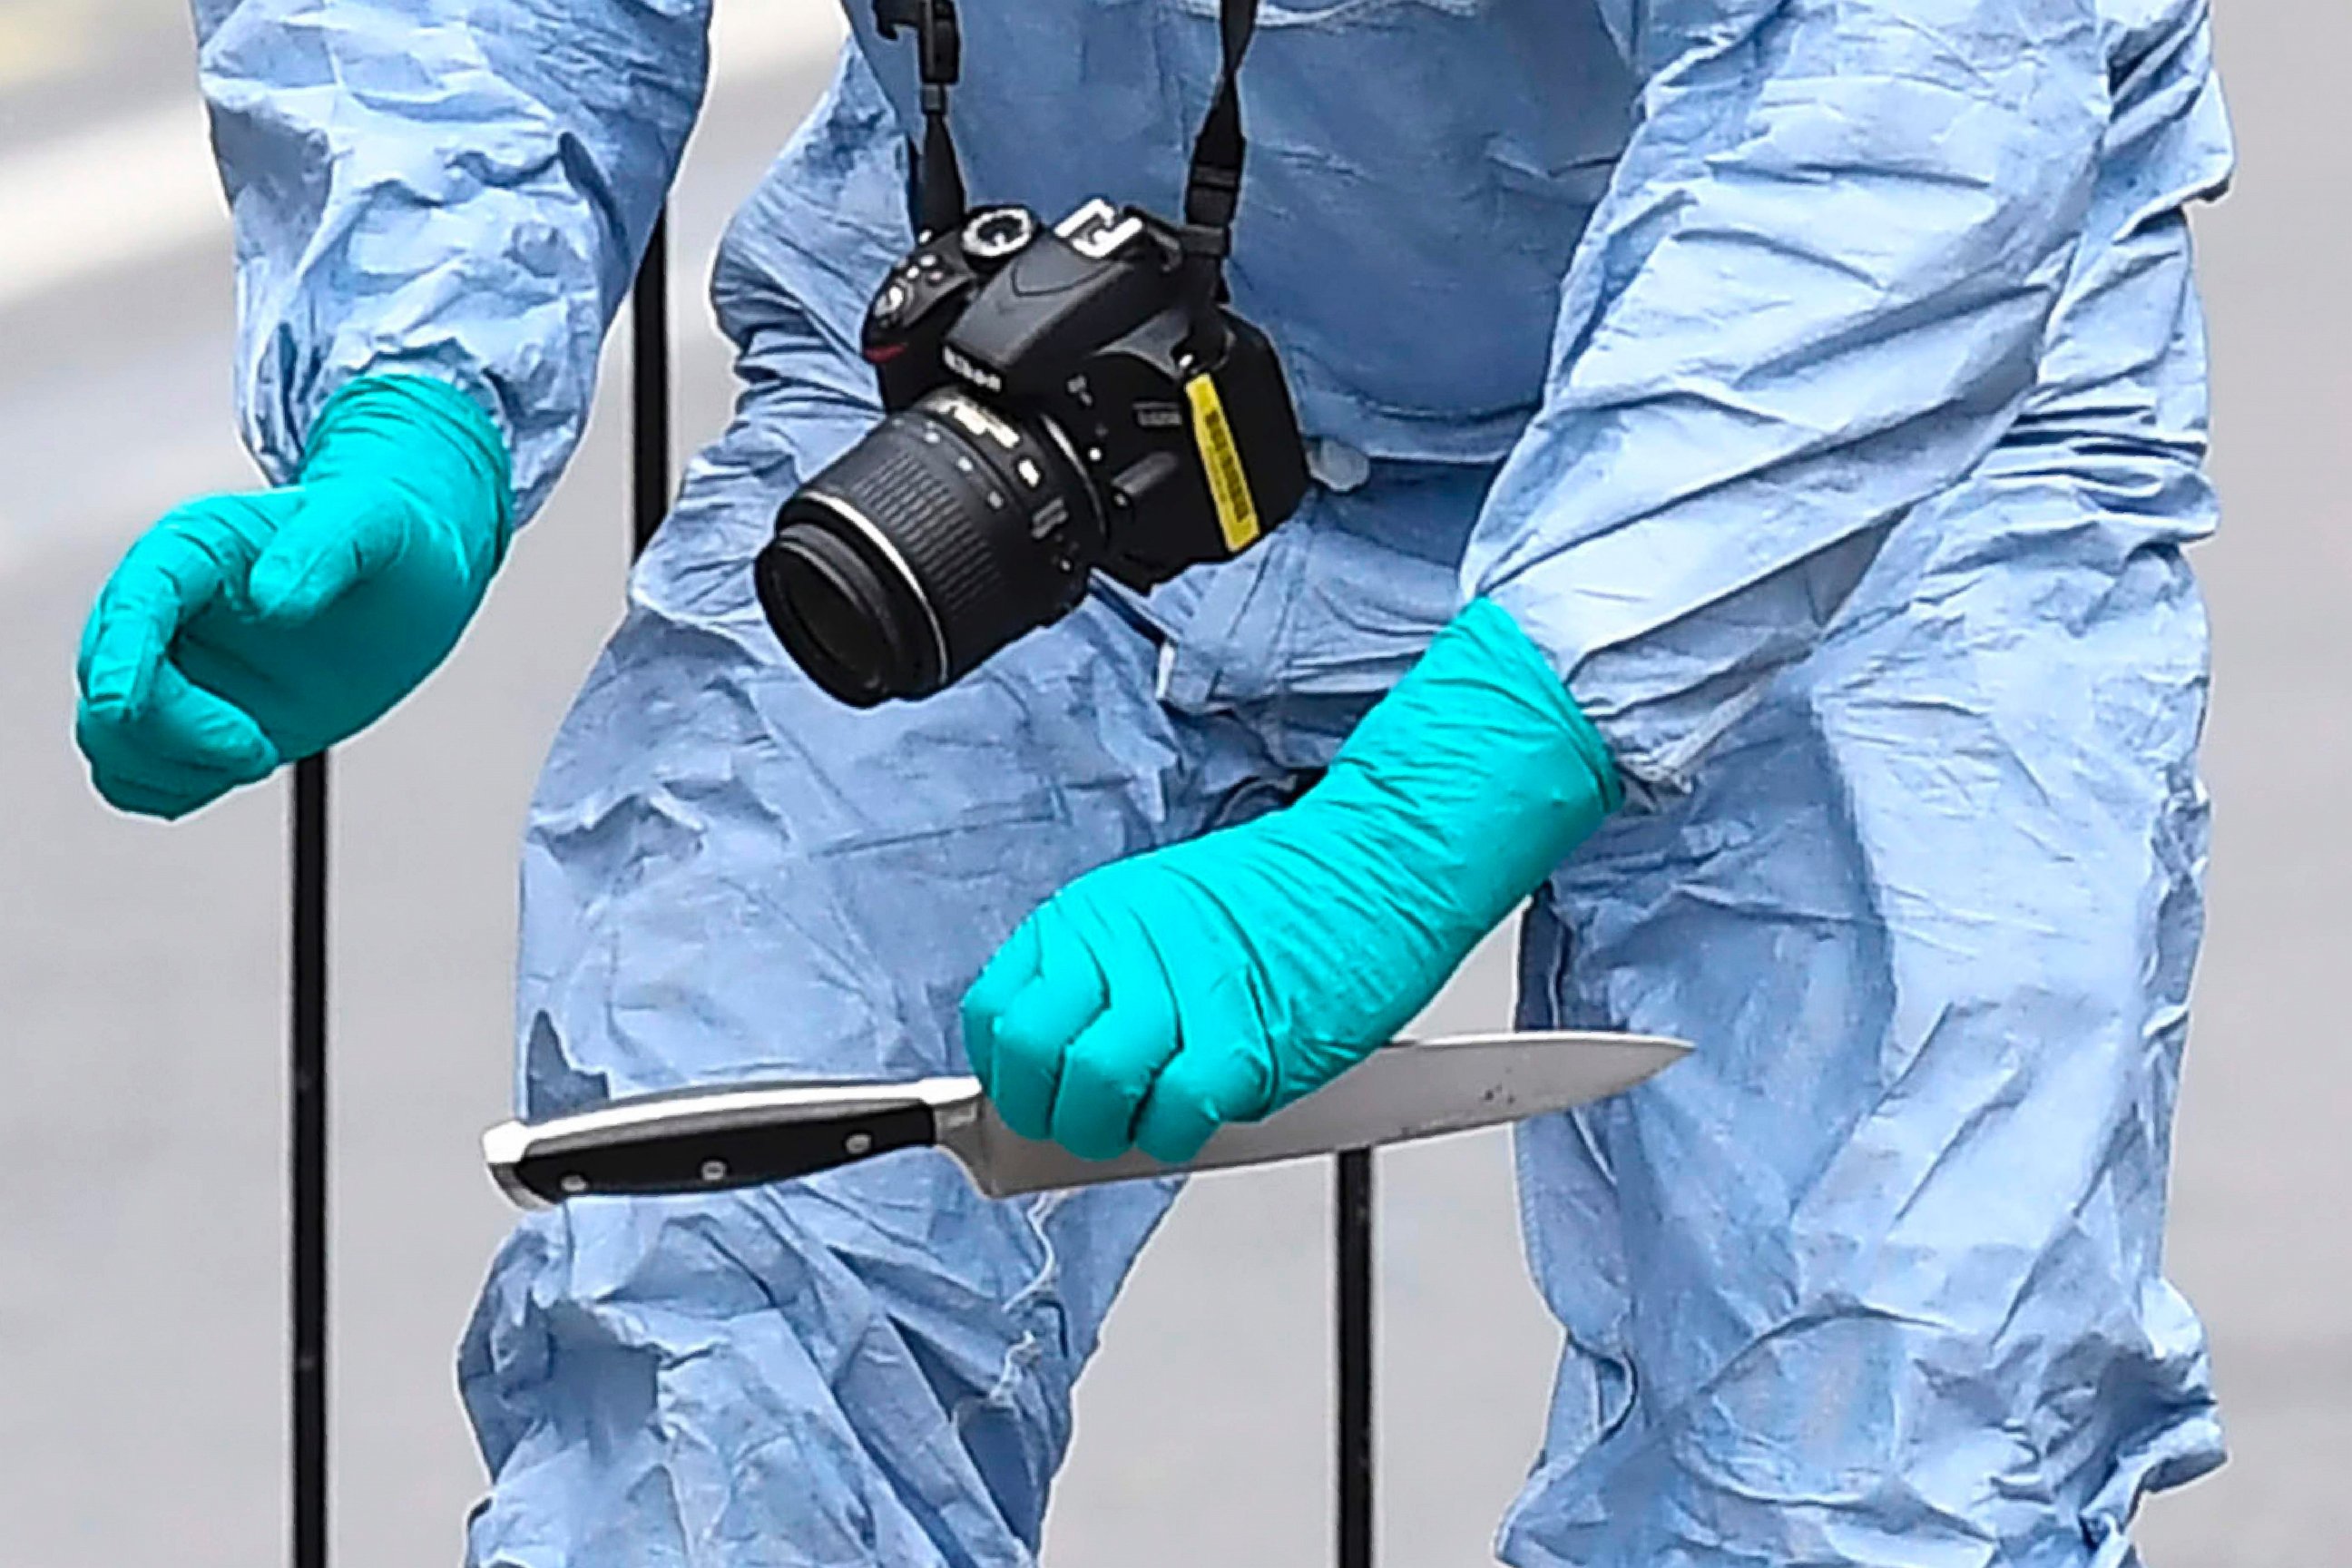 PHOTO: A British police forensics officer holds a knife as evidence is collected on Whitehall near the Houses of Parliament in central London on April 27, 2017, at the scene where a man was detained and taken away by police.